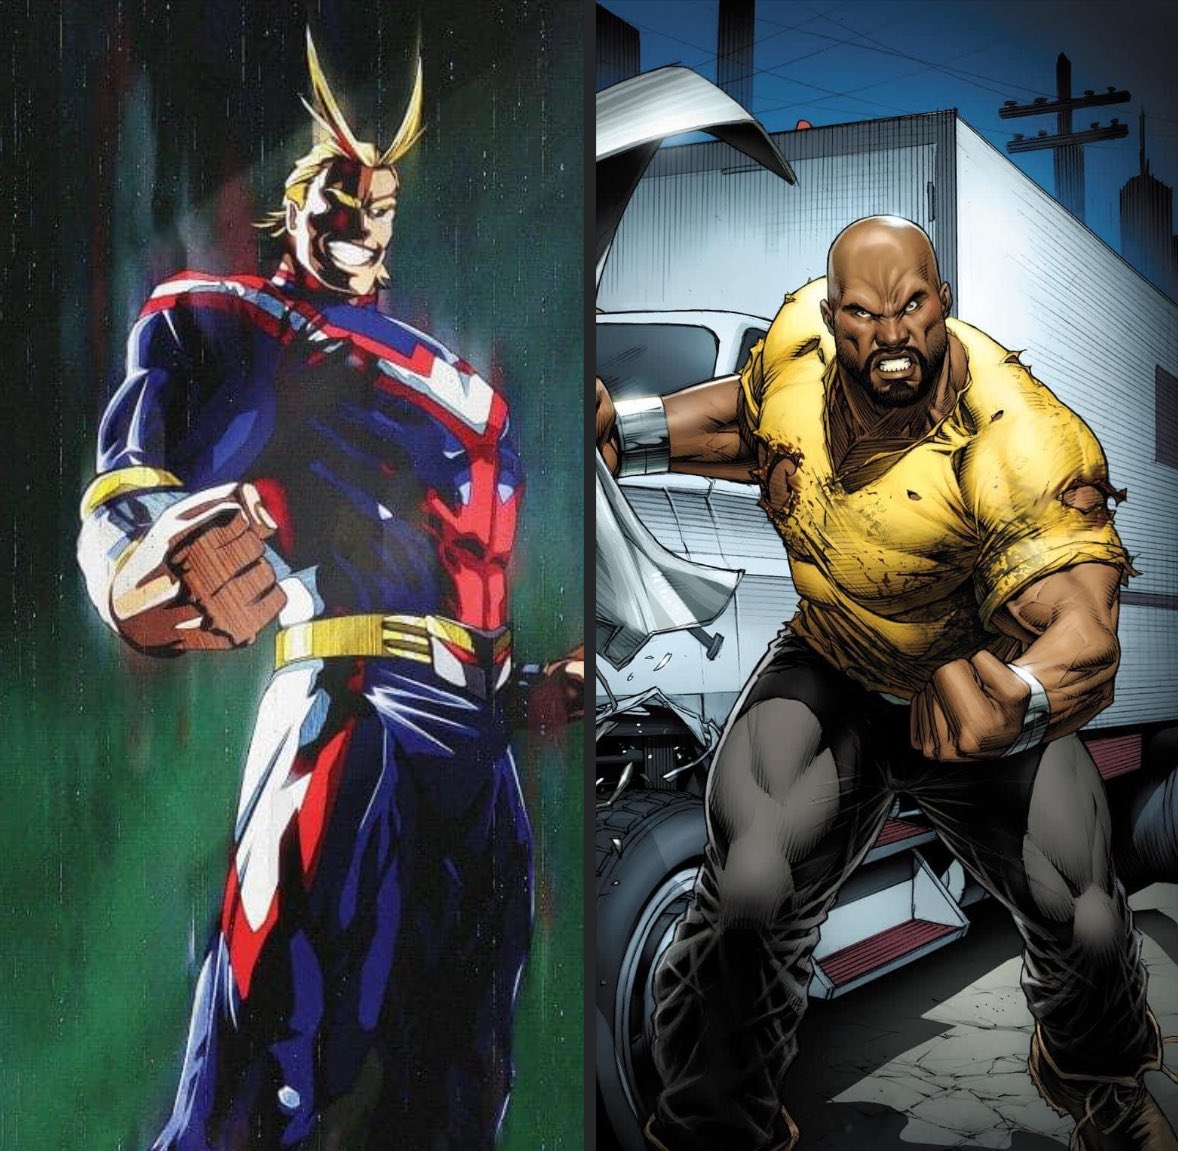 #AllMight🦸🏼‍♂️ VS #LukeCage💢

(My Hero Academia VS Marvel)

-All Might owes Luke $200

Who wins, and why⁉️

#whowouldwin #deathbattle #SHPOLL24